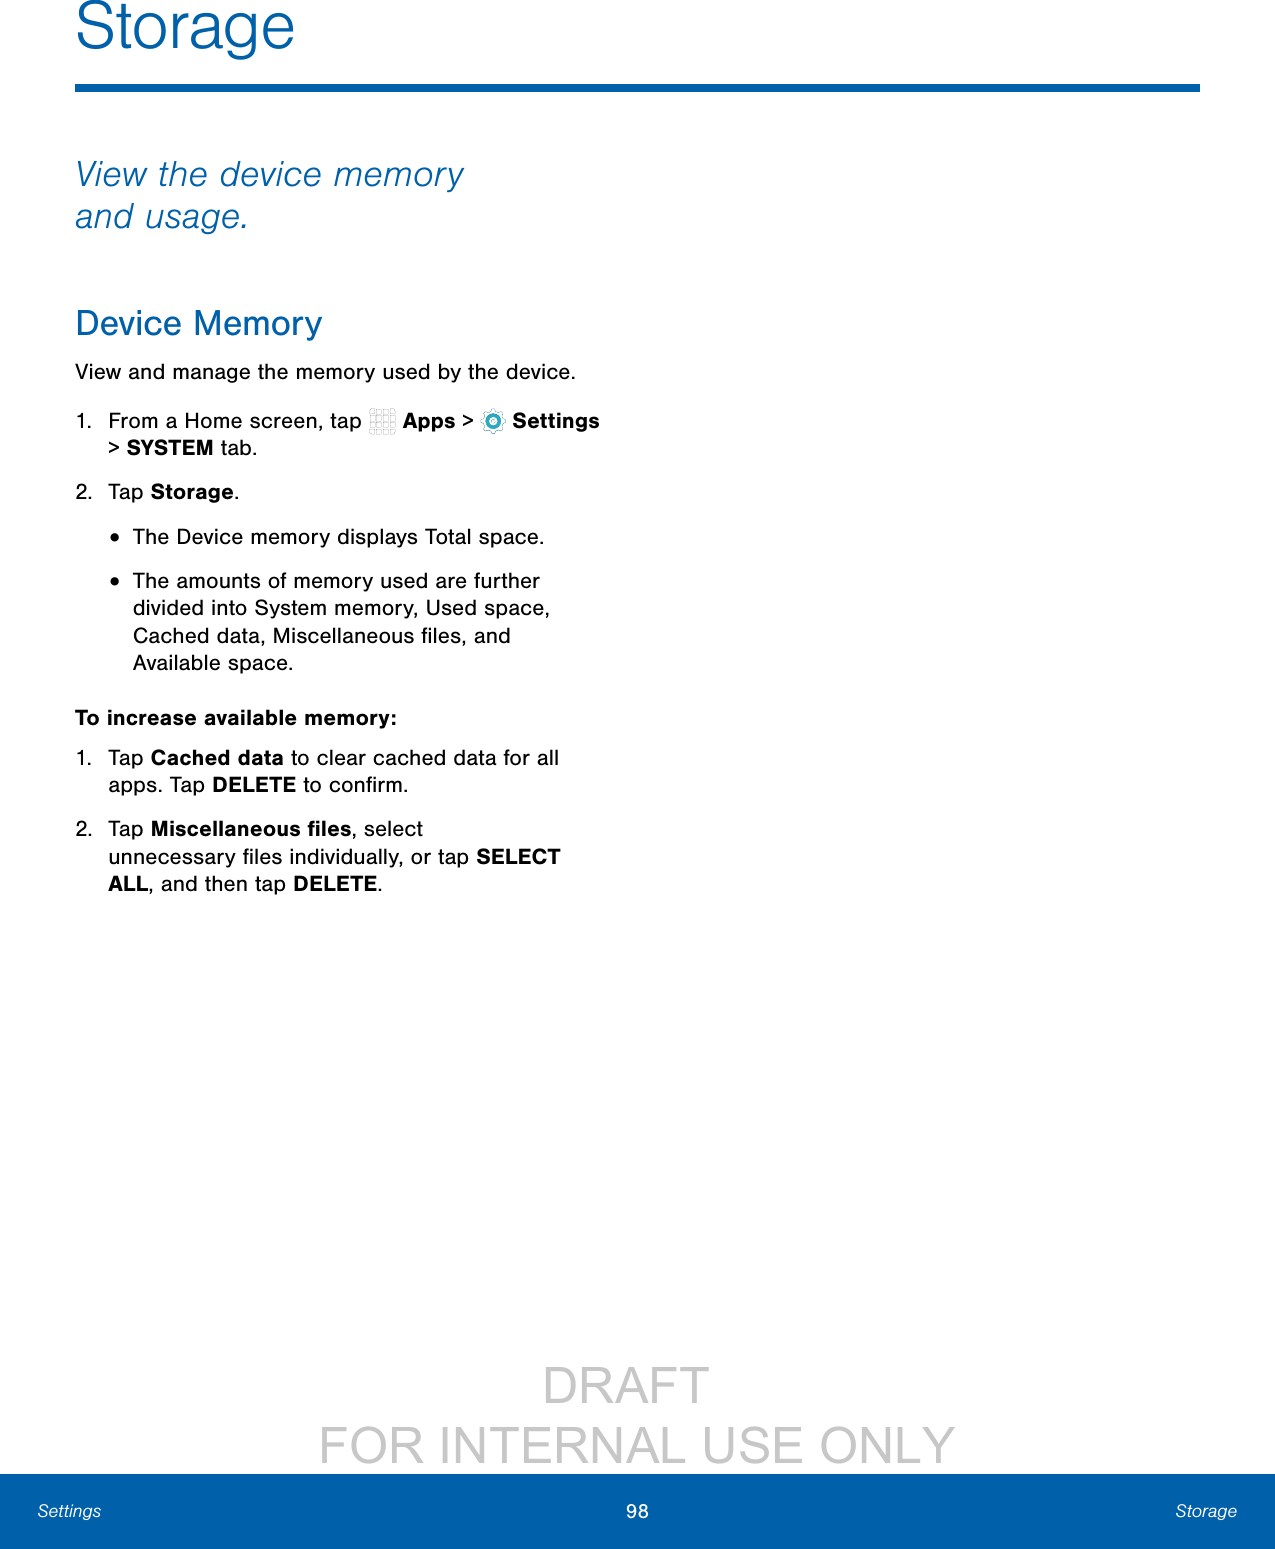                 DRAFT FOR INTERNAL USE ONLY98 StorageSettingsStorageView the device memory andusage.Device MemoryView and manage the memory used by the device.1.  From a Home screen, tap   Apps &gt;  Settings &gt; SYSTEM tab.2.  Tap Storage.•  The Device memory displays Total space.•  The amounts of memory used are further divided into System memory, Used space, Cached data, Miscellaneous ﬁles, and Available space.To increase available memory:1.  Tap Cached data to clear cached data for all apps. Tap DELETE to conﬁrm.2.  Tap Miscellaneous ﬁles, select unnecessaryﬁles individually, or tap SELECT ALL, andthentap DELETE.